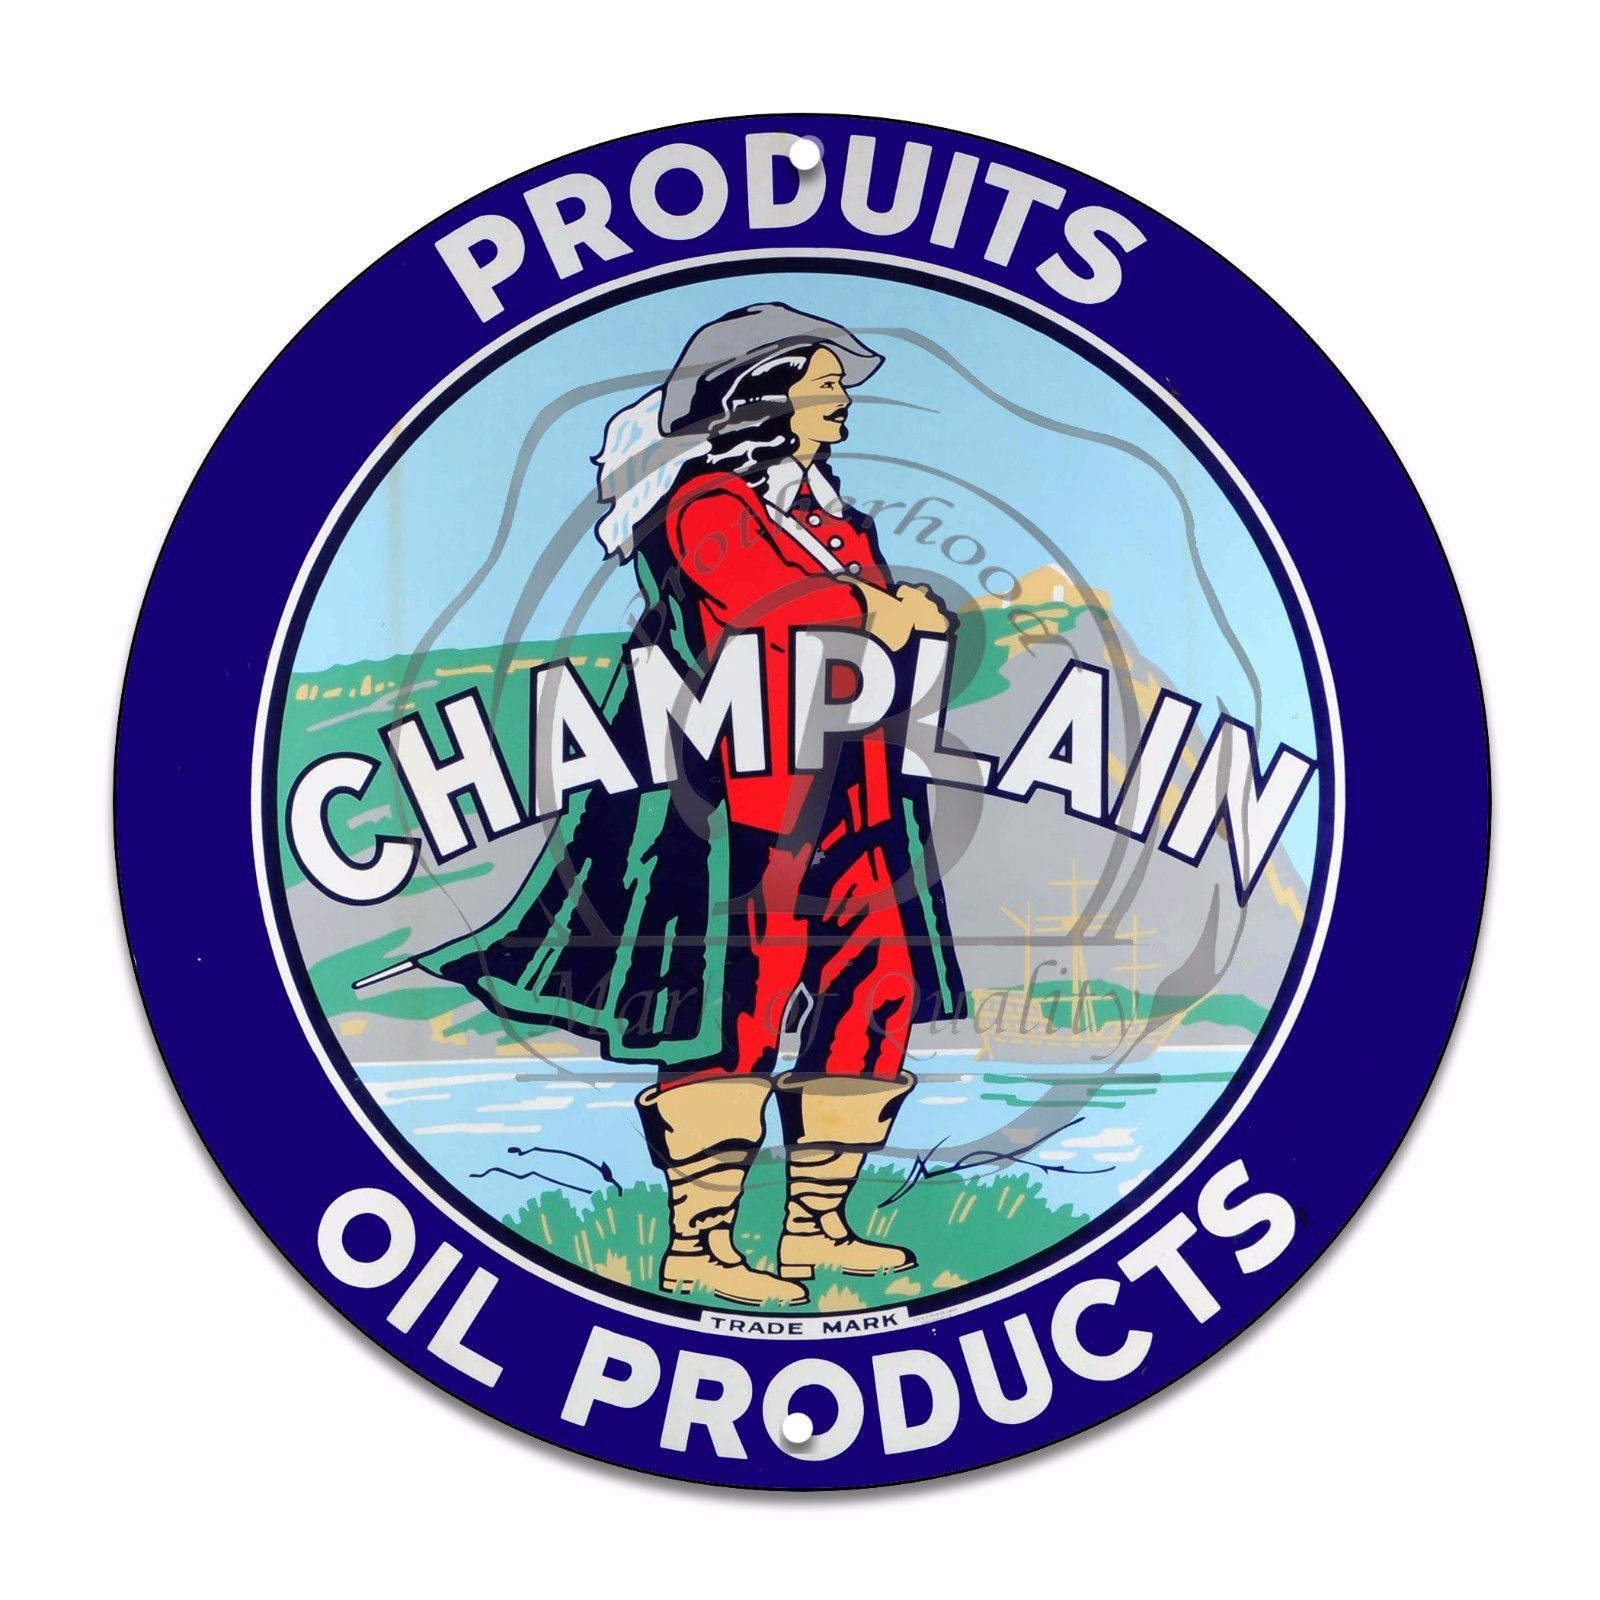 Champalin Oil Products Design (Reproduction) 12" Circle Aluminum Sign - $16.09